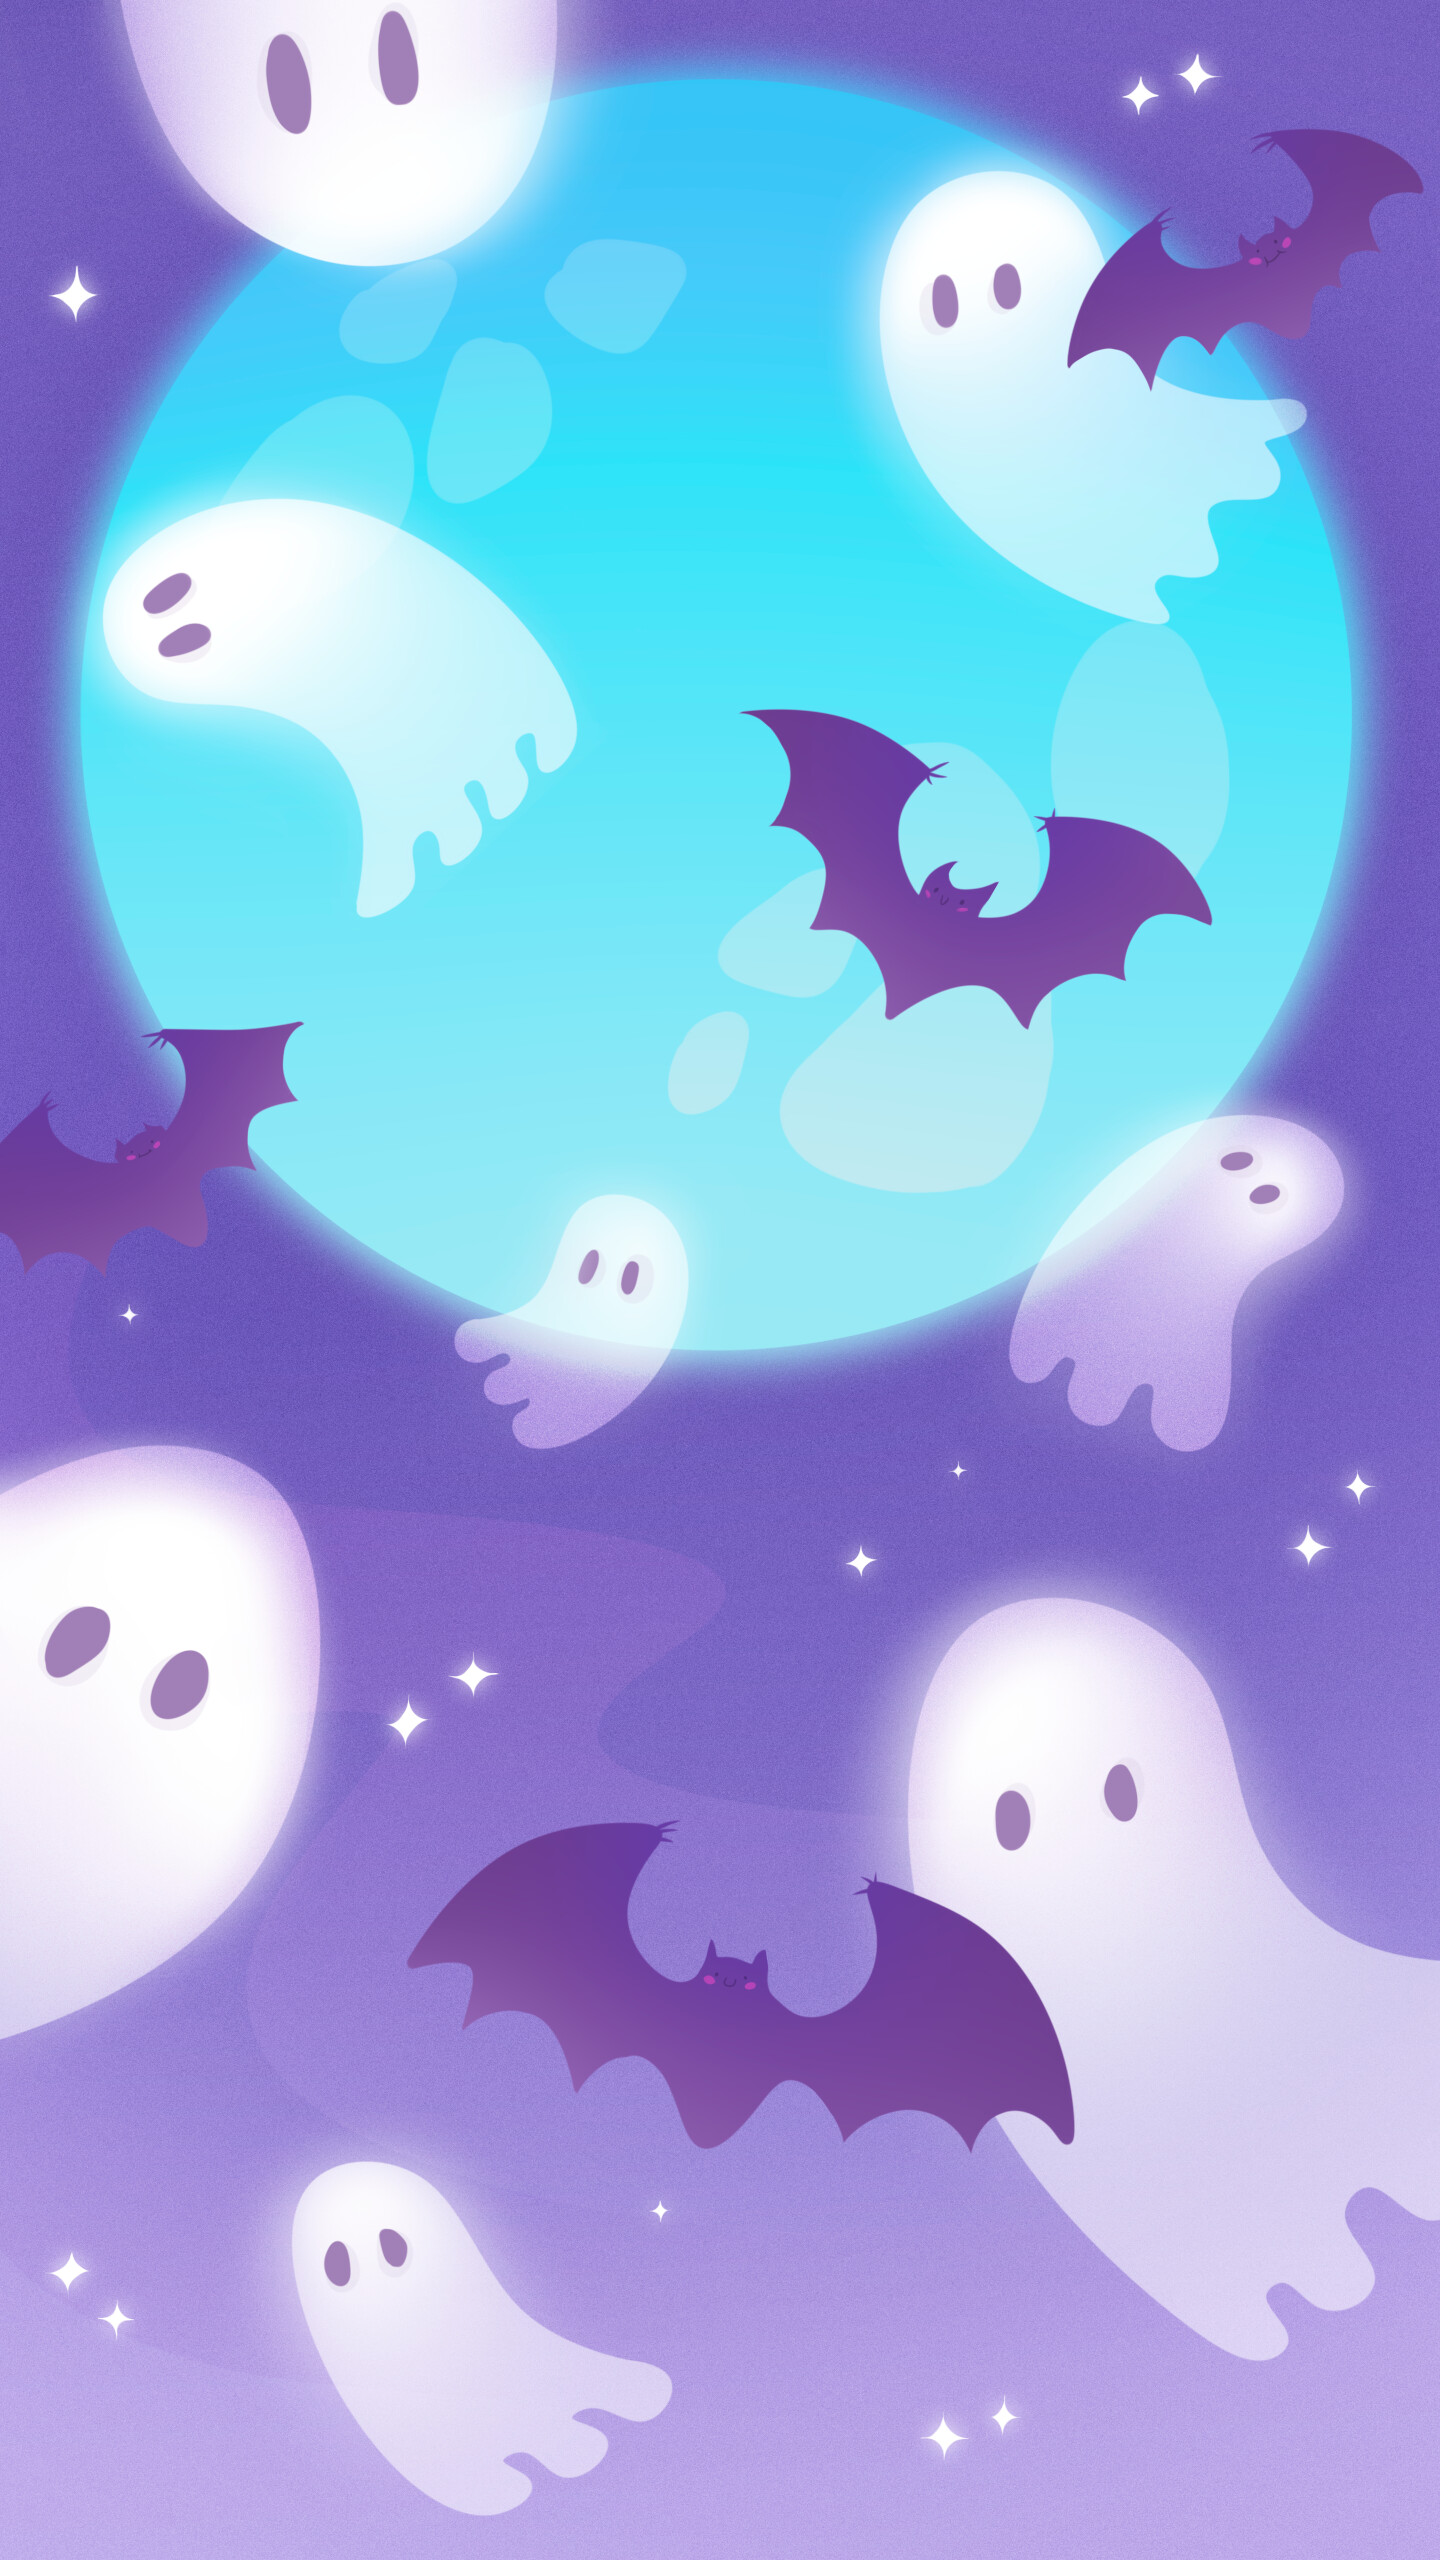 Buy Pastel Goth Clipart Cute Halloween Clipart Printable Online in India   Etsy